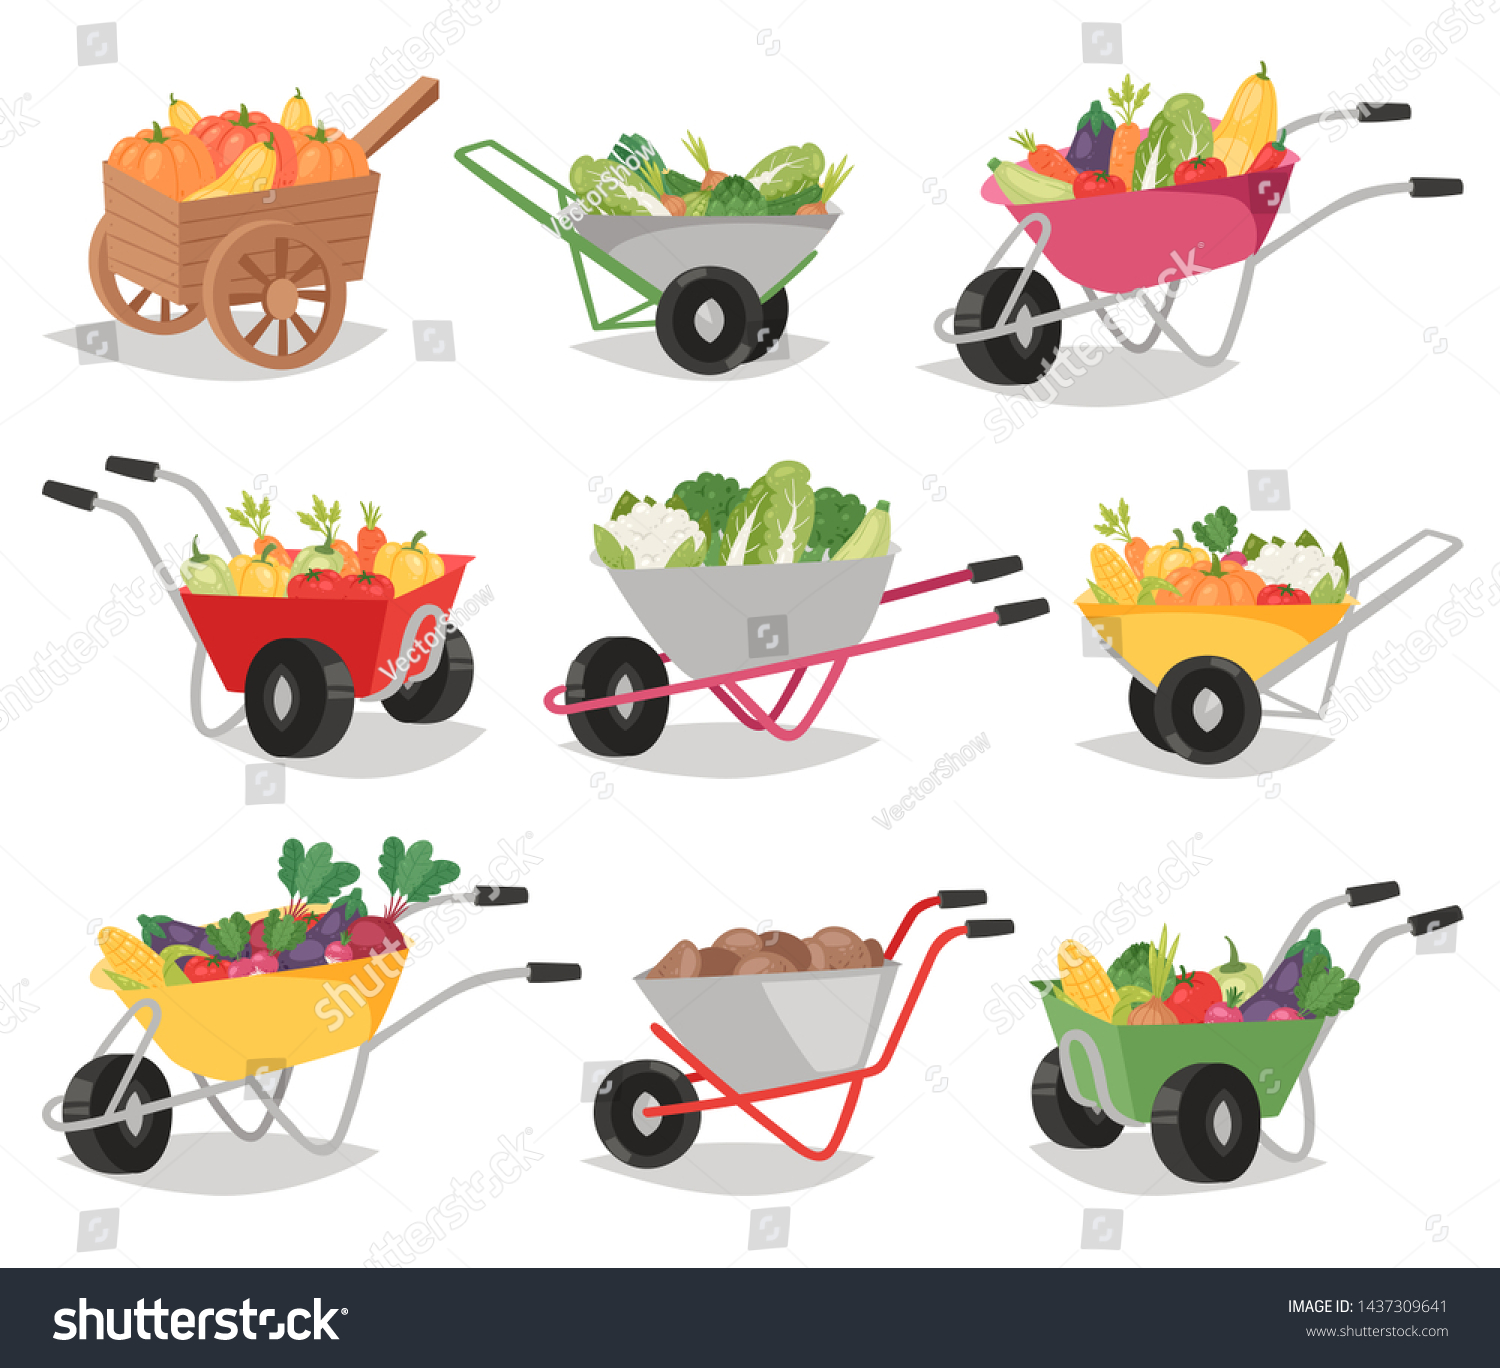 Vegetables in wheelbarrow healthy nutrition of vegetably tomato pepper and carrot in wheel barrow for vegetarians eating farming food illustration vegetated set isolated on white background #1437309641